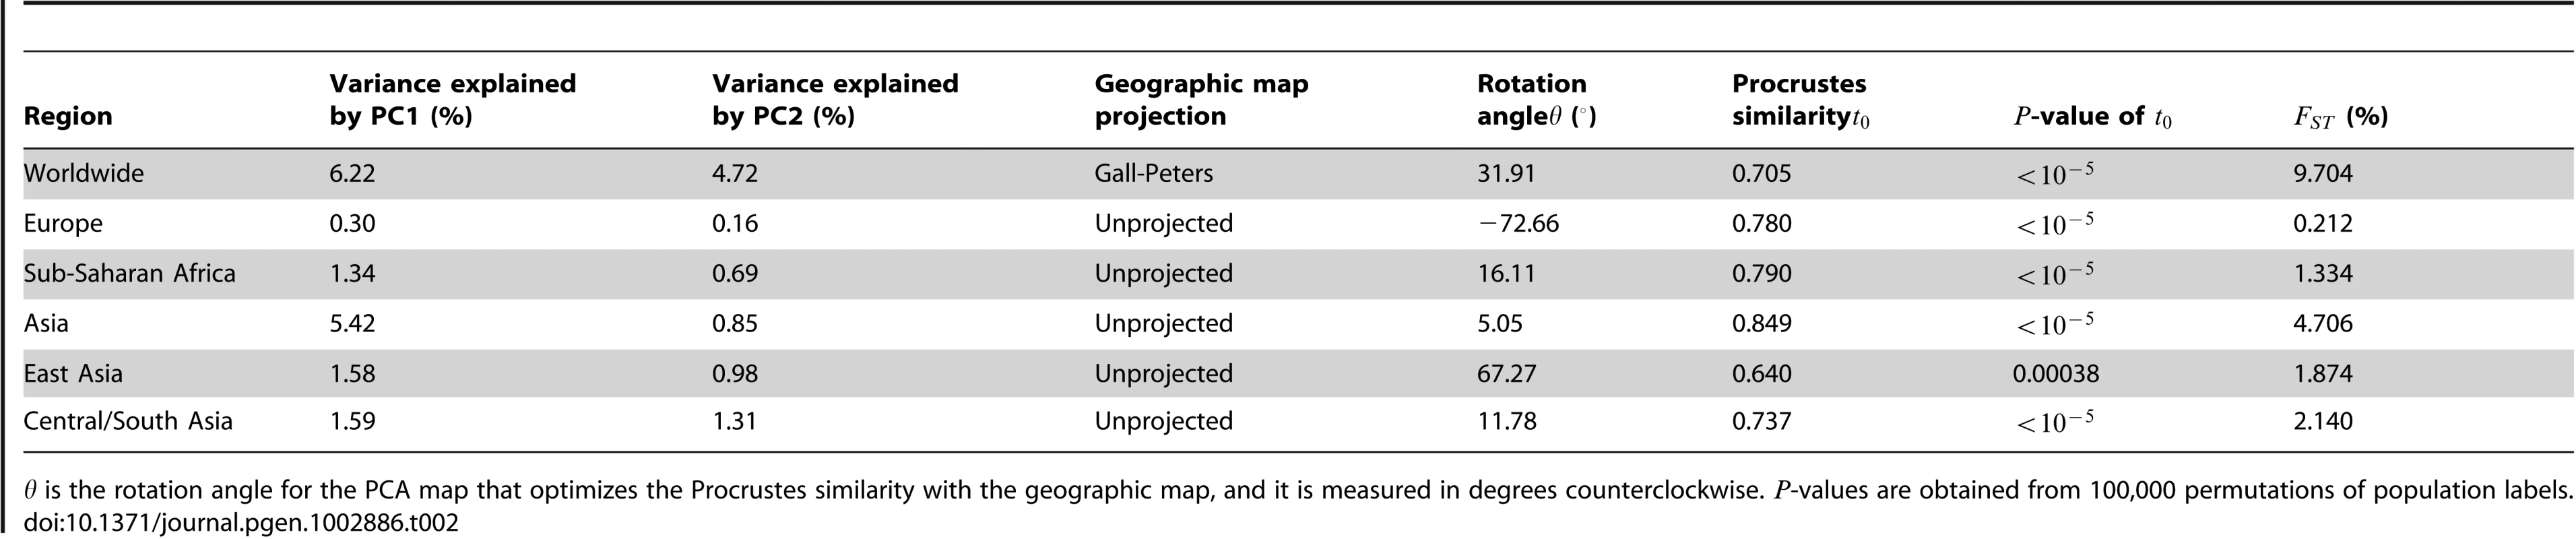 Summary of the results for datasets from different geographic regions.